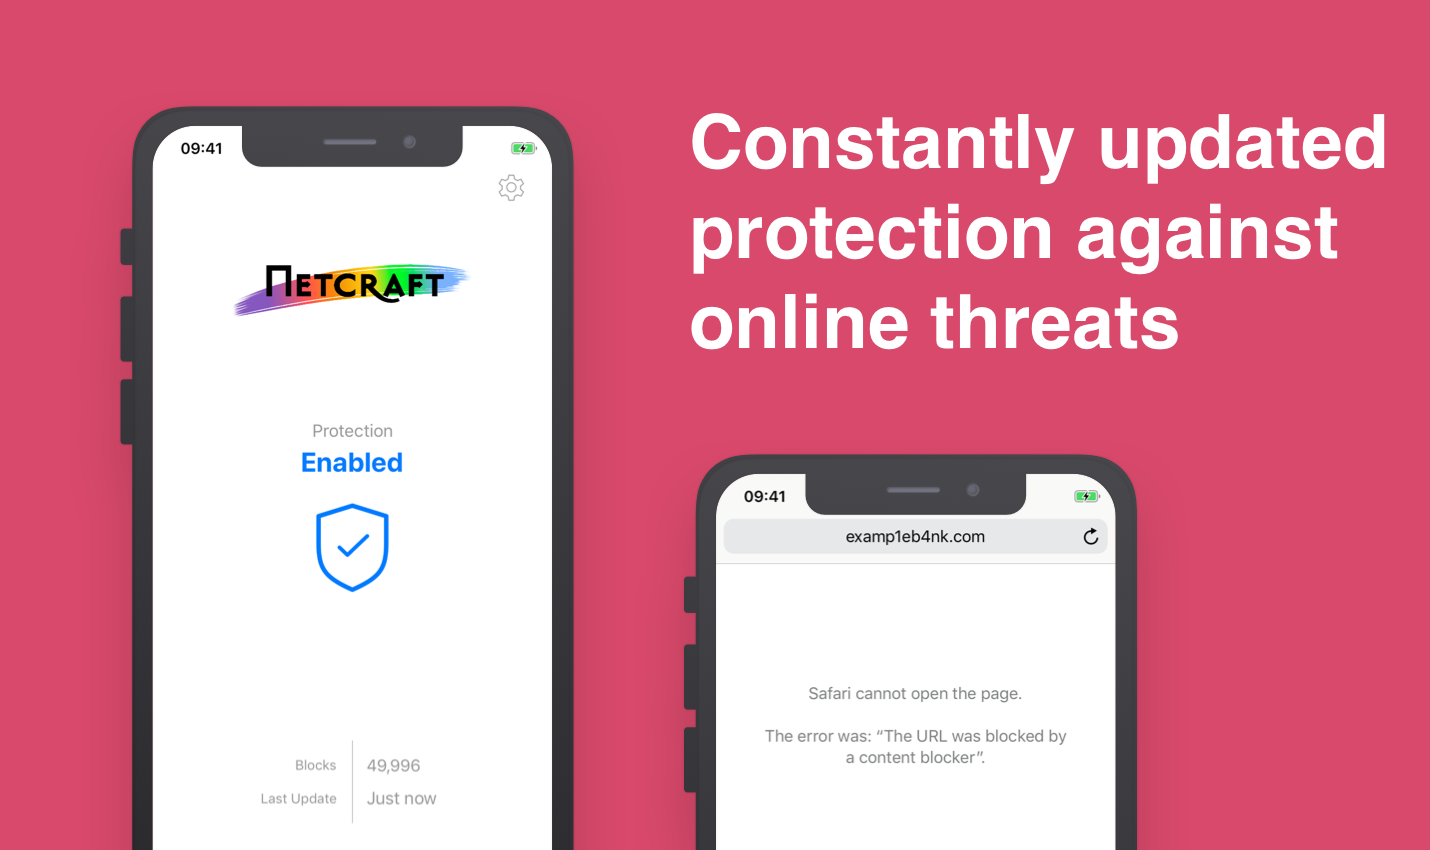 Constantly updated protection against online threats